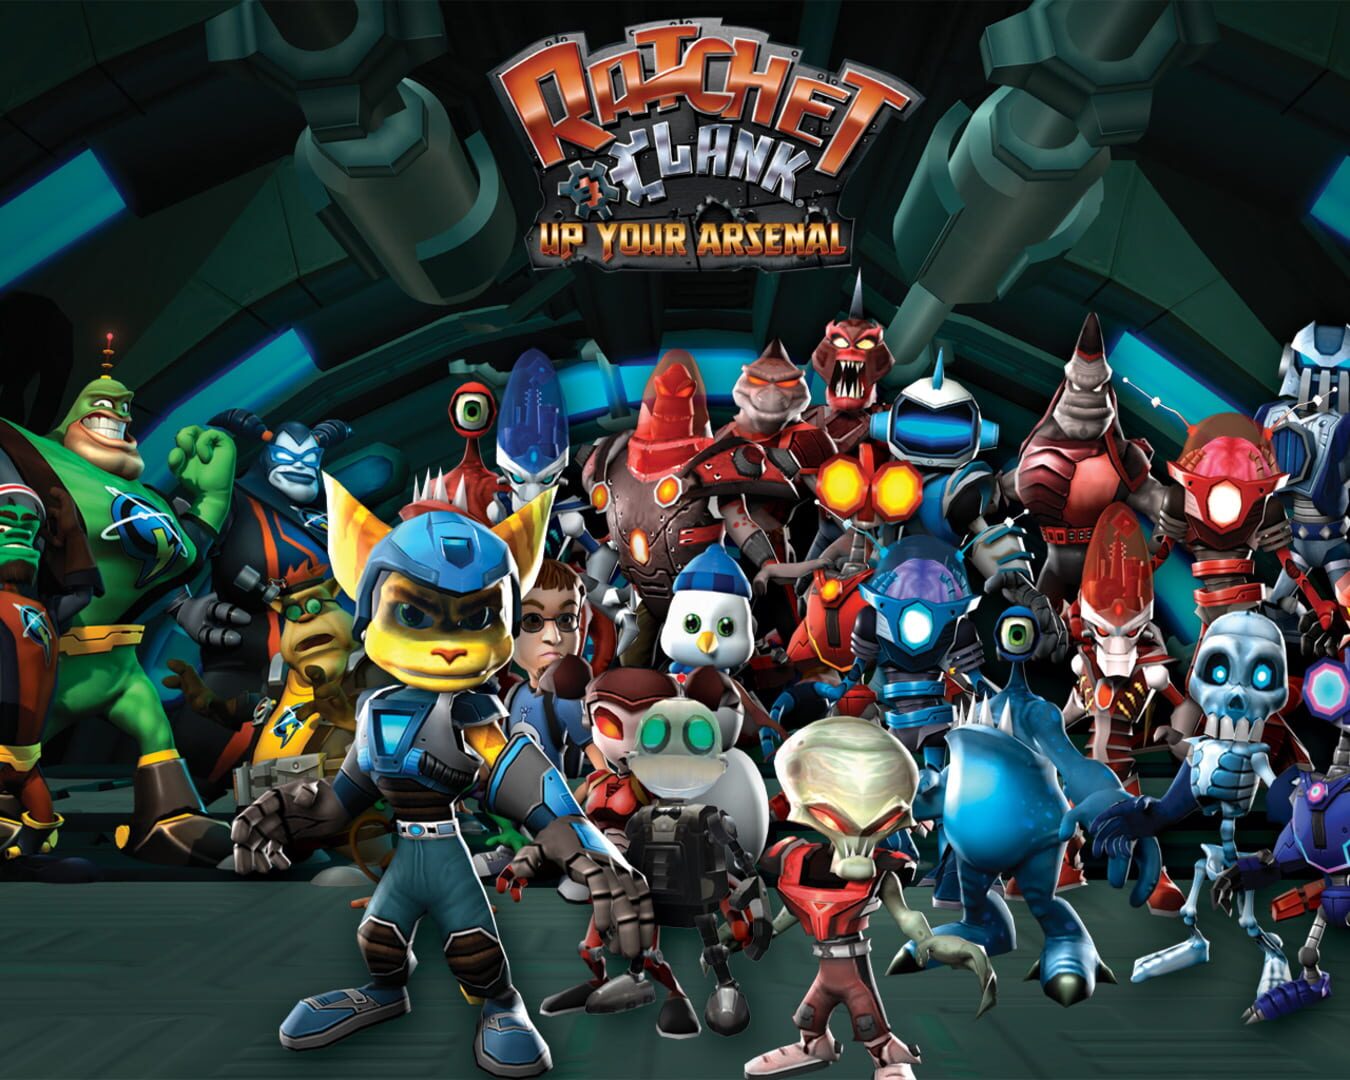 Gamelib Ratchet Clank Up Your Arsenal